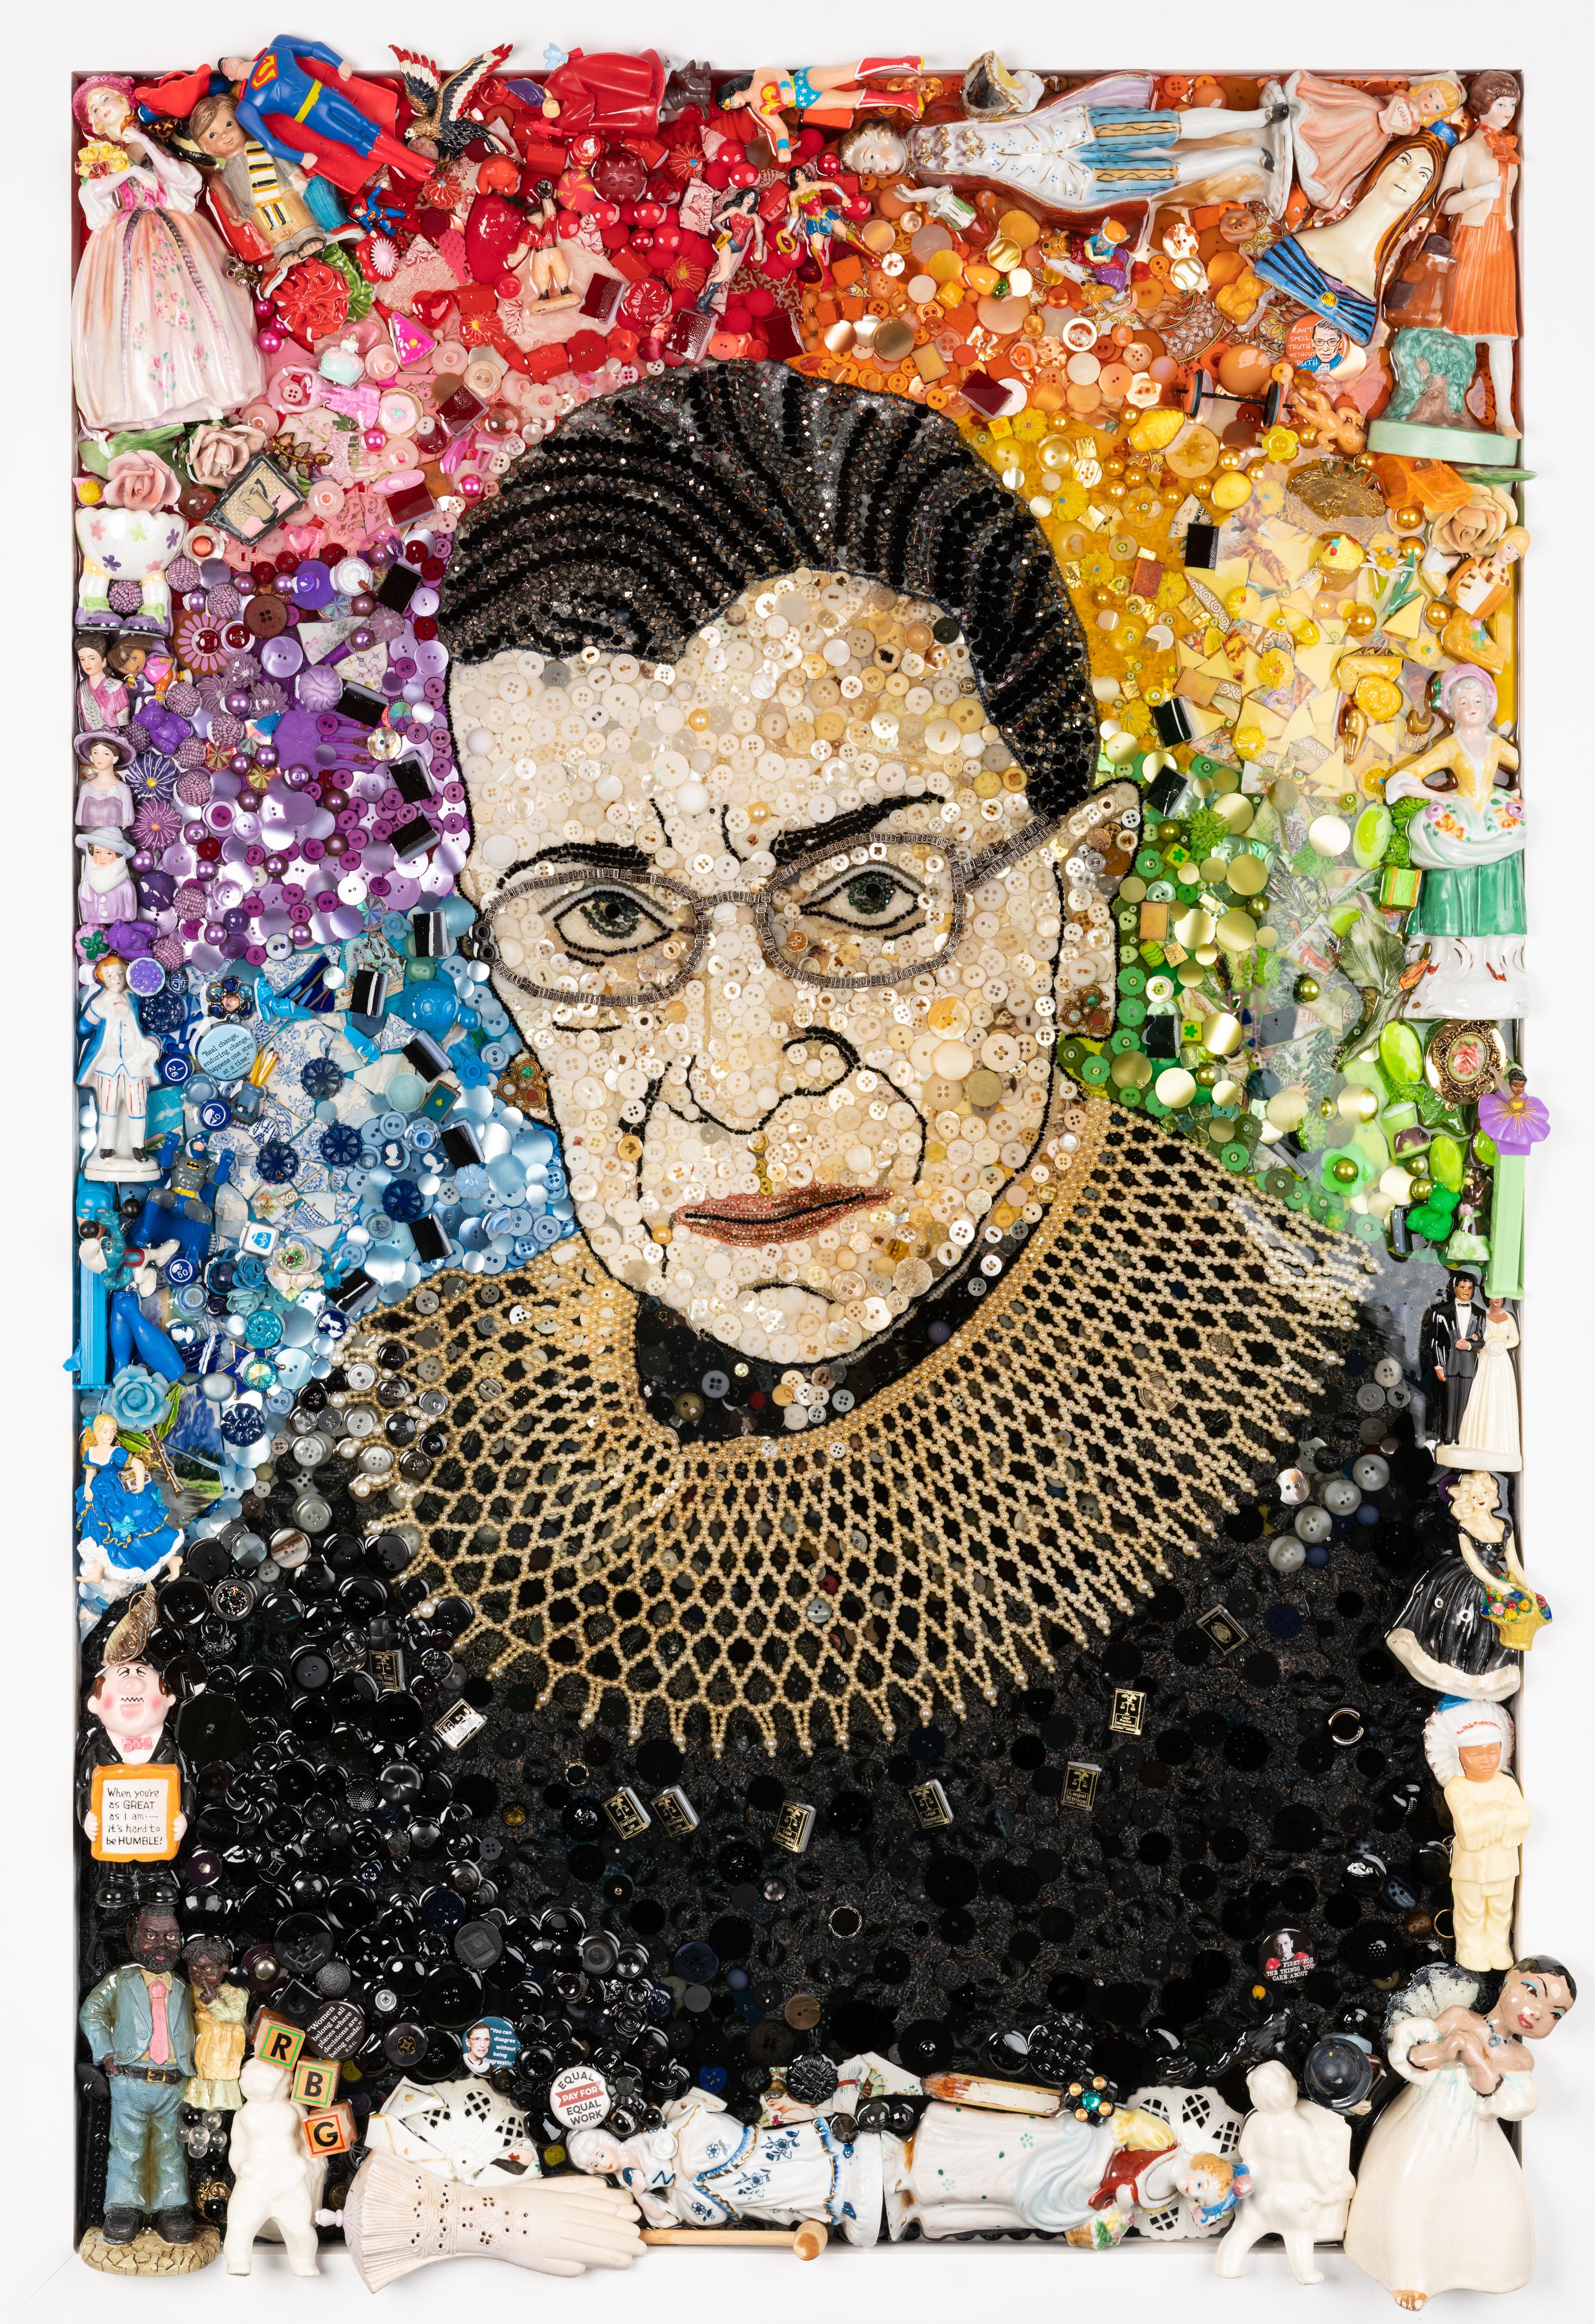 "Ruth" - Framed - Homage to the inimitable Ruth Ginsberg - Mixed Media Art by Stephanie Jaffe